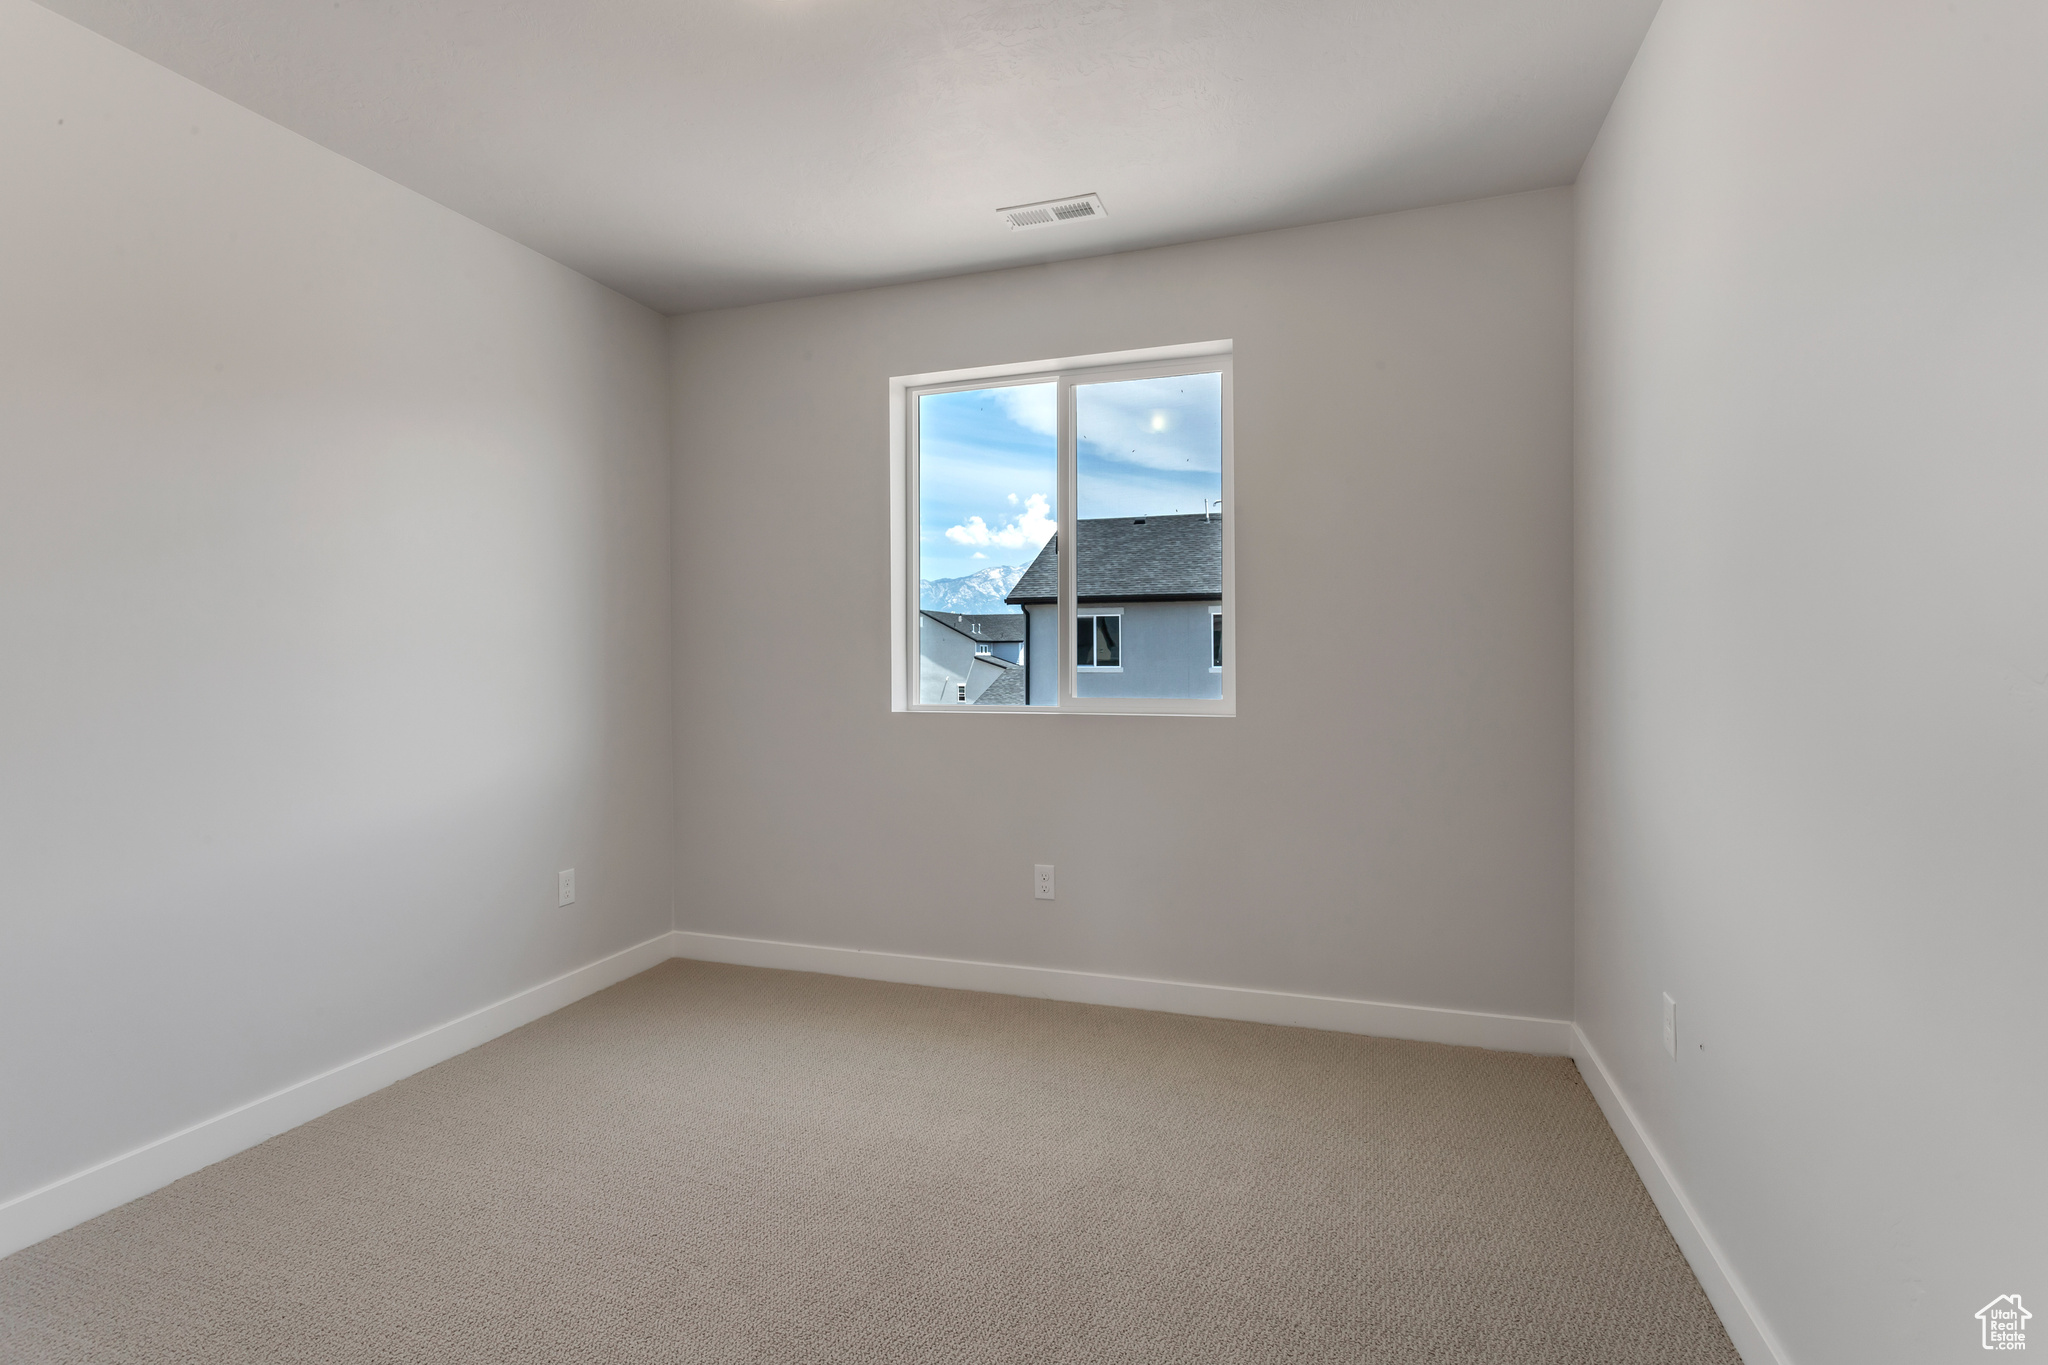 PHOTOS FROM A SIMILAR HOME. COLORS AND SELECTIONS WILL VARY.  Bedroom featuring light colored carpet